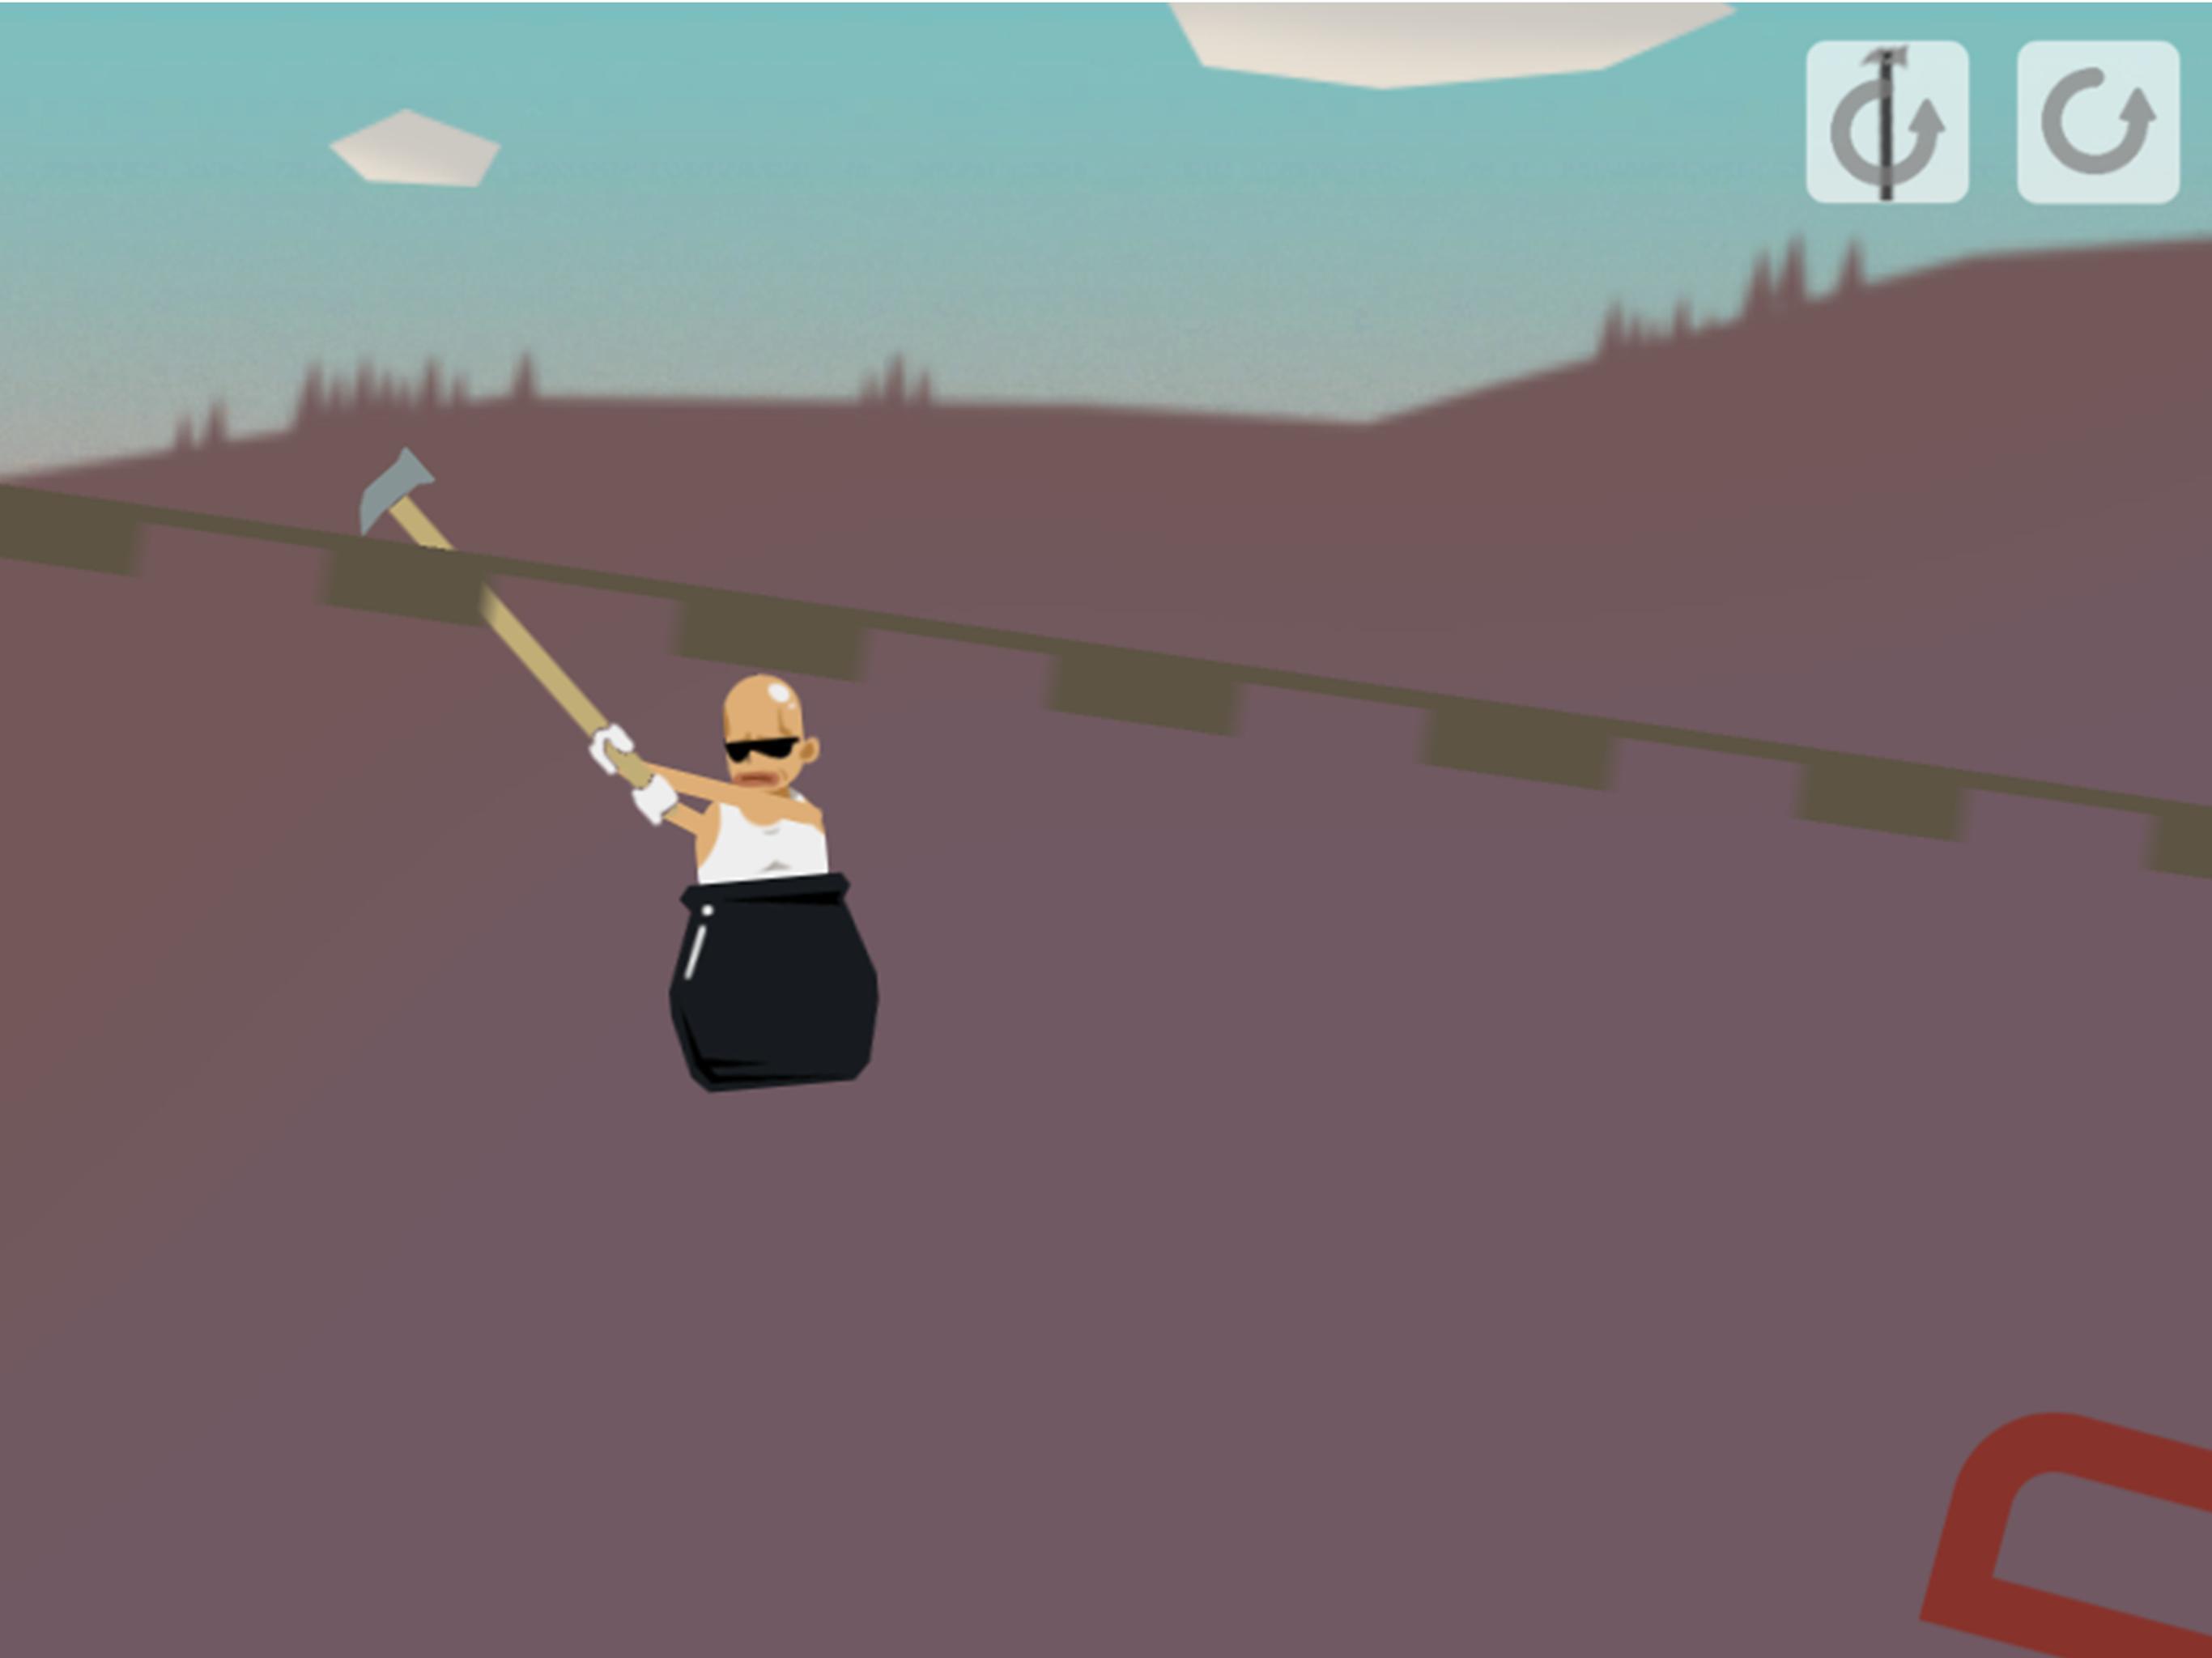 Can t get over. Геттинг овер ИТ. Getting over it Скриншот. Getting over it игра для Android. Геттинг овер ИТ на аву.